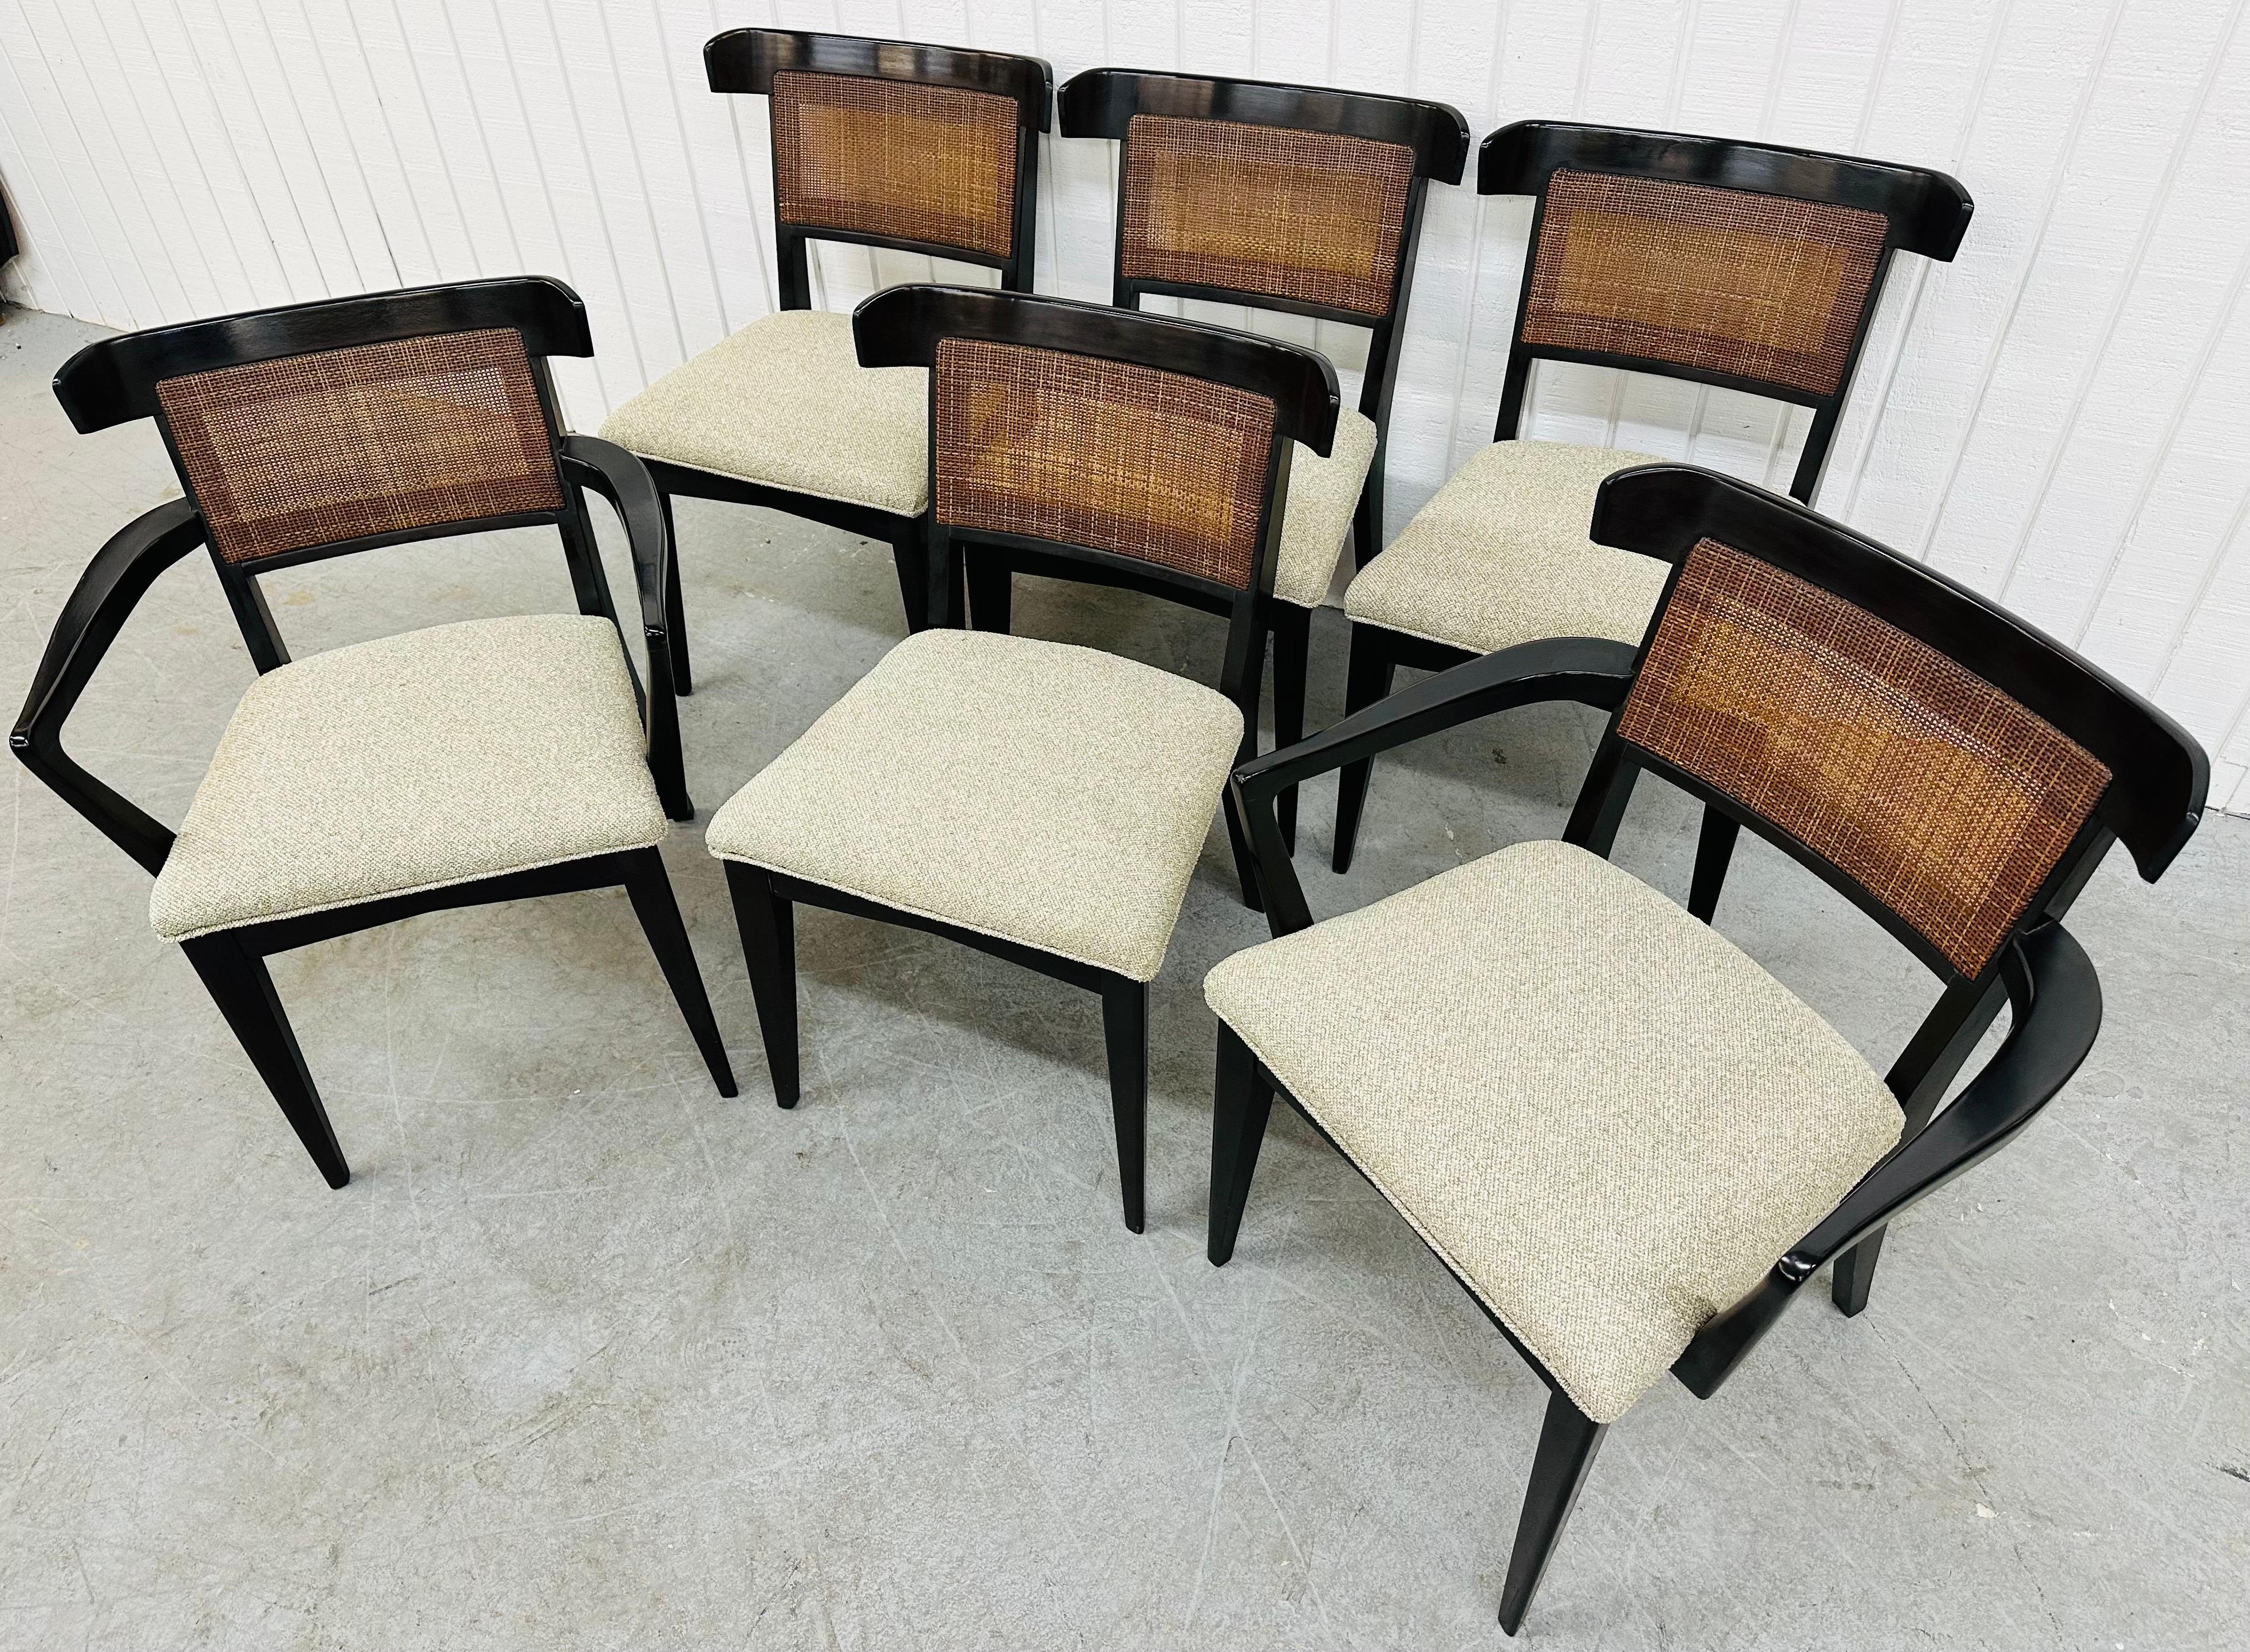 This listing is for a set of six Mid-Century Modern Dunbar Style Dining Chairs. Featuring two arm chairs, four straight chairs, cane backs, black lacquered frames, and newly upholstered gray seats. This is an exceptional combination of quality and